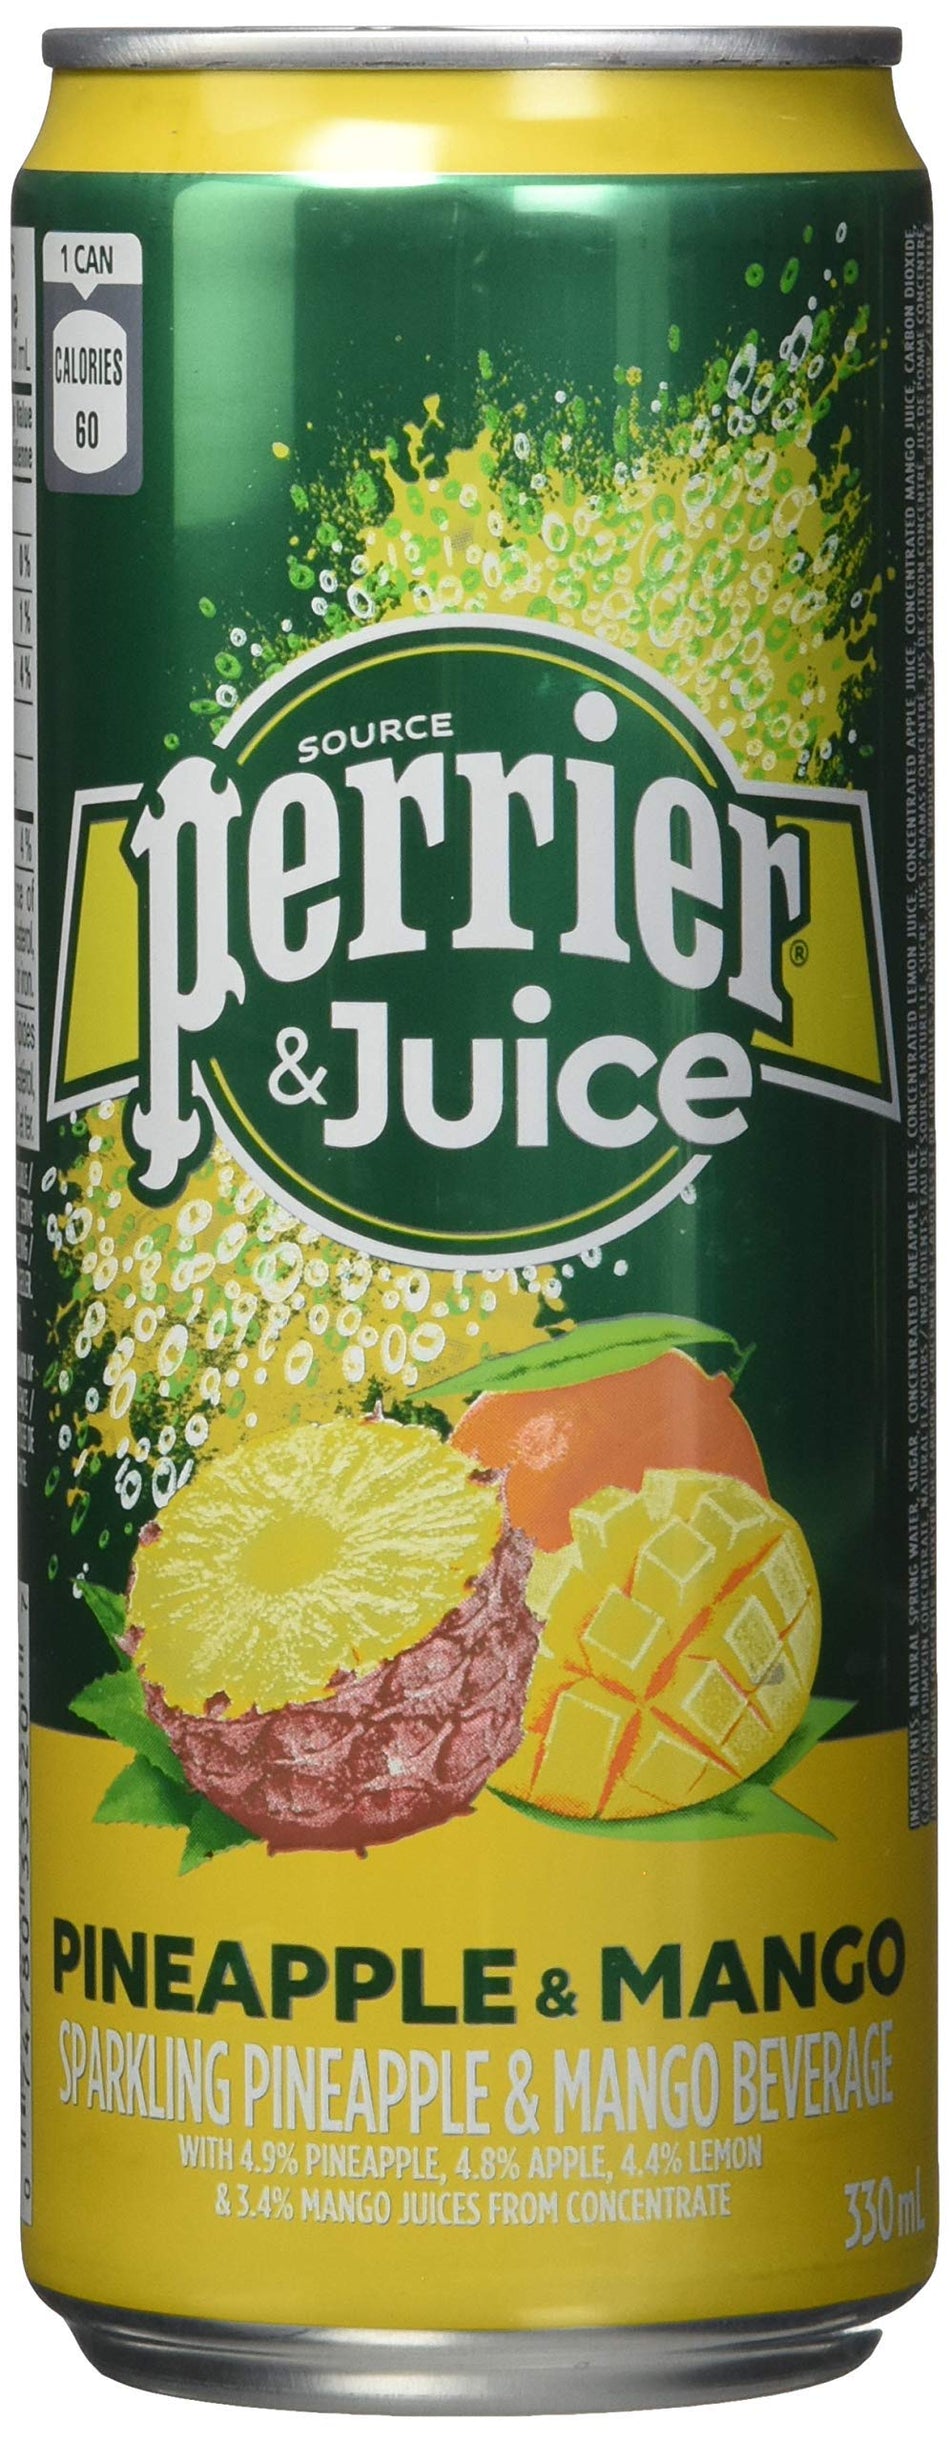 Juice Sparkling Pineapple & Mango Beverage, 330mL can, 24 Count(4-Pack)